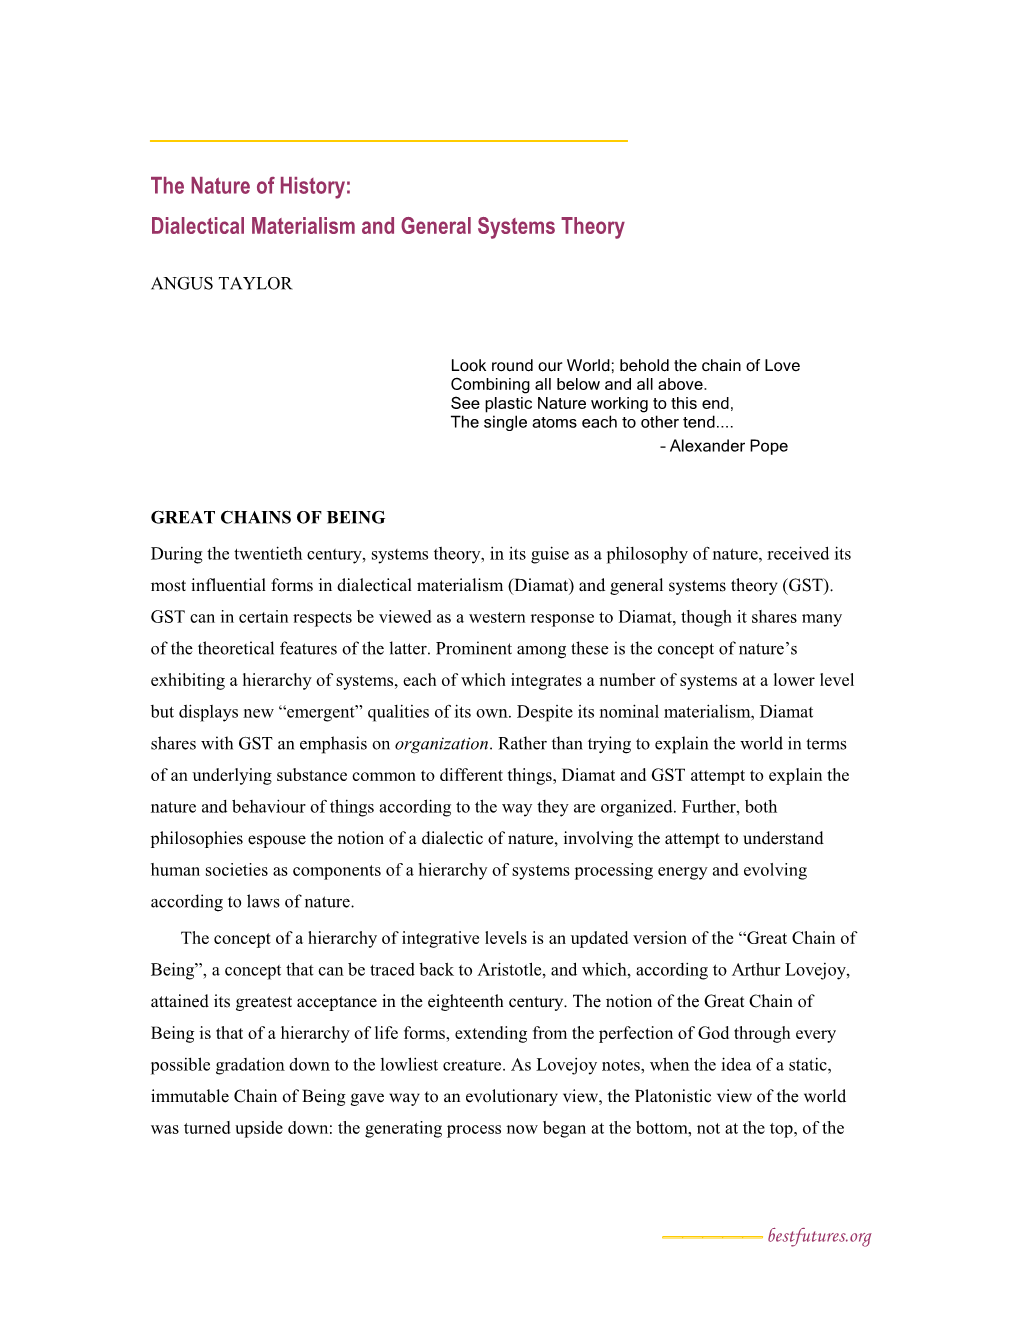 The Nature of History: Dialectical Materialism and General Systems Theory